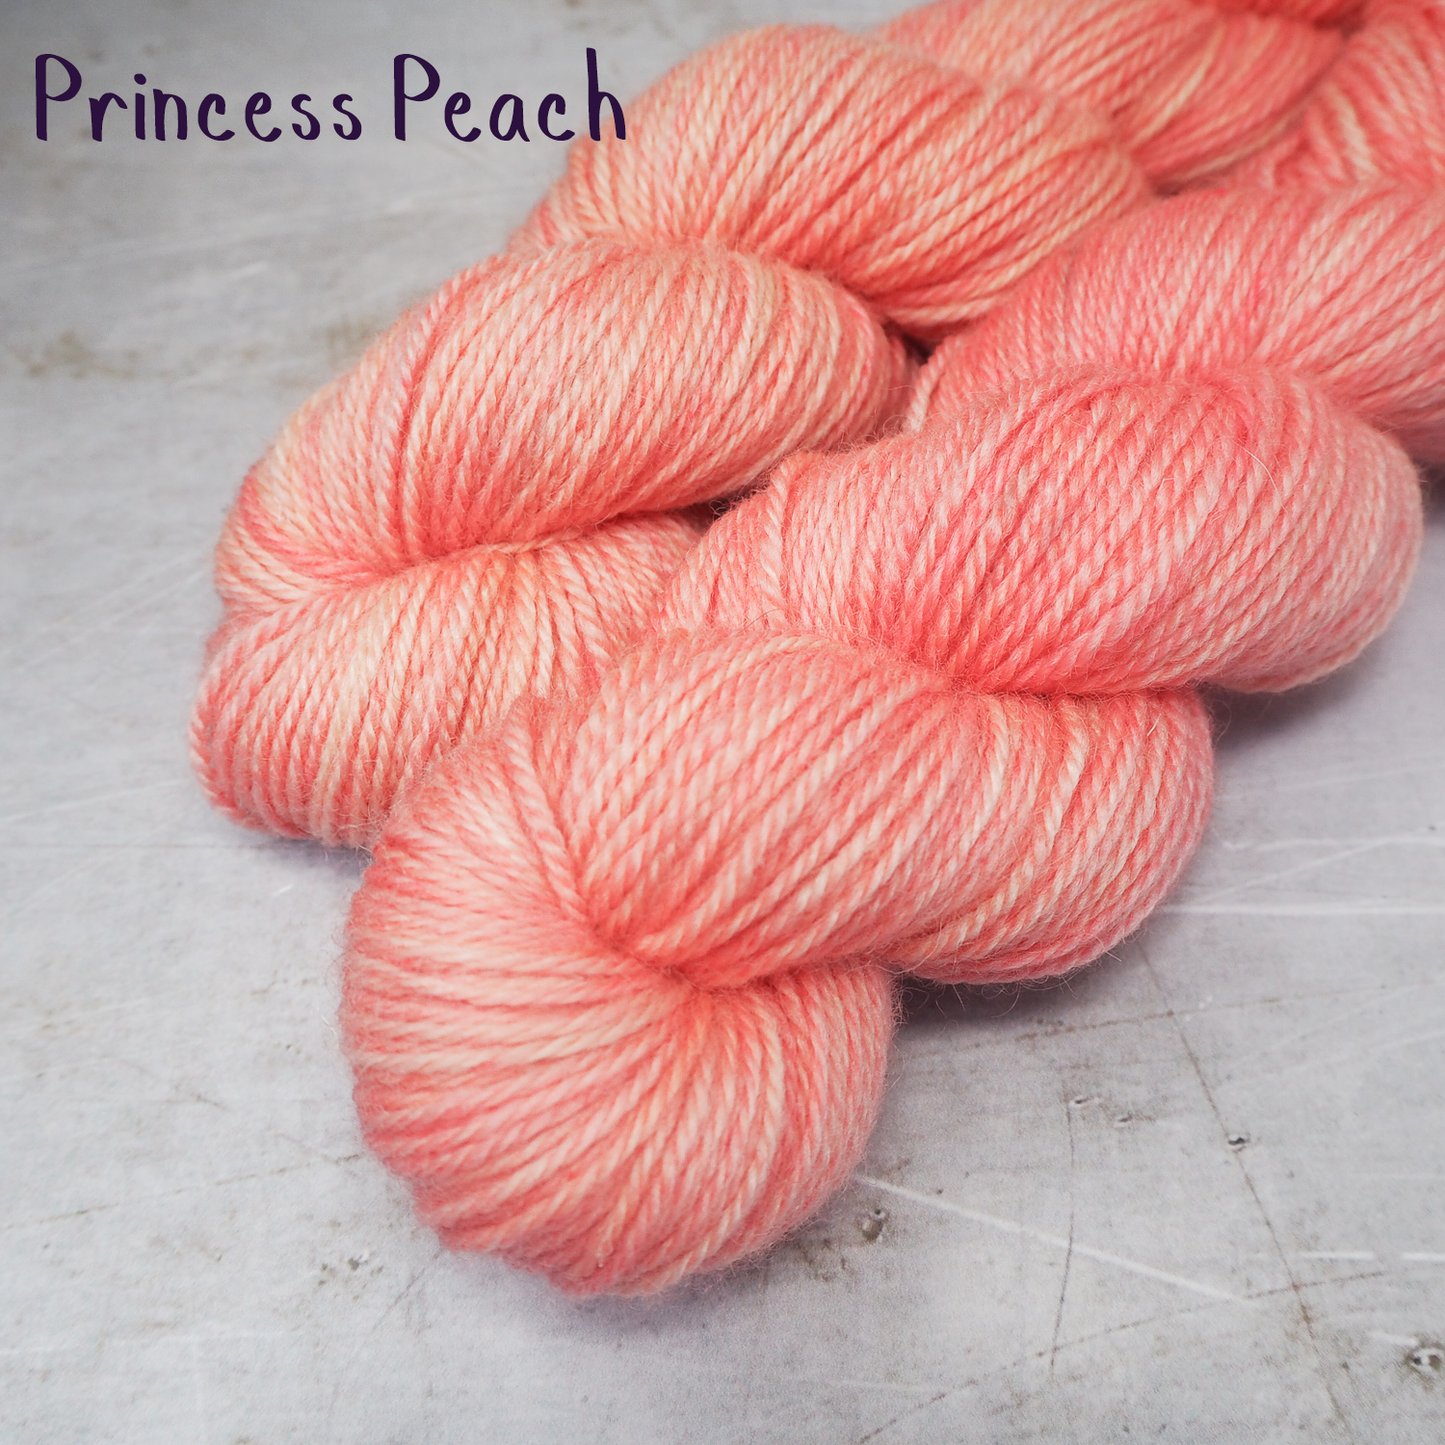 Two skeins of soft DK weight yarn dyed a rich peach colour. 